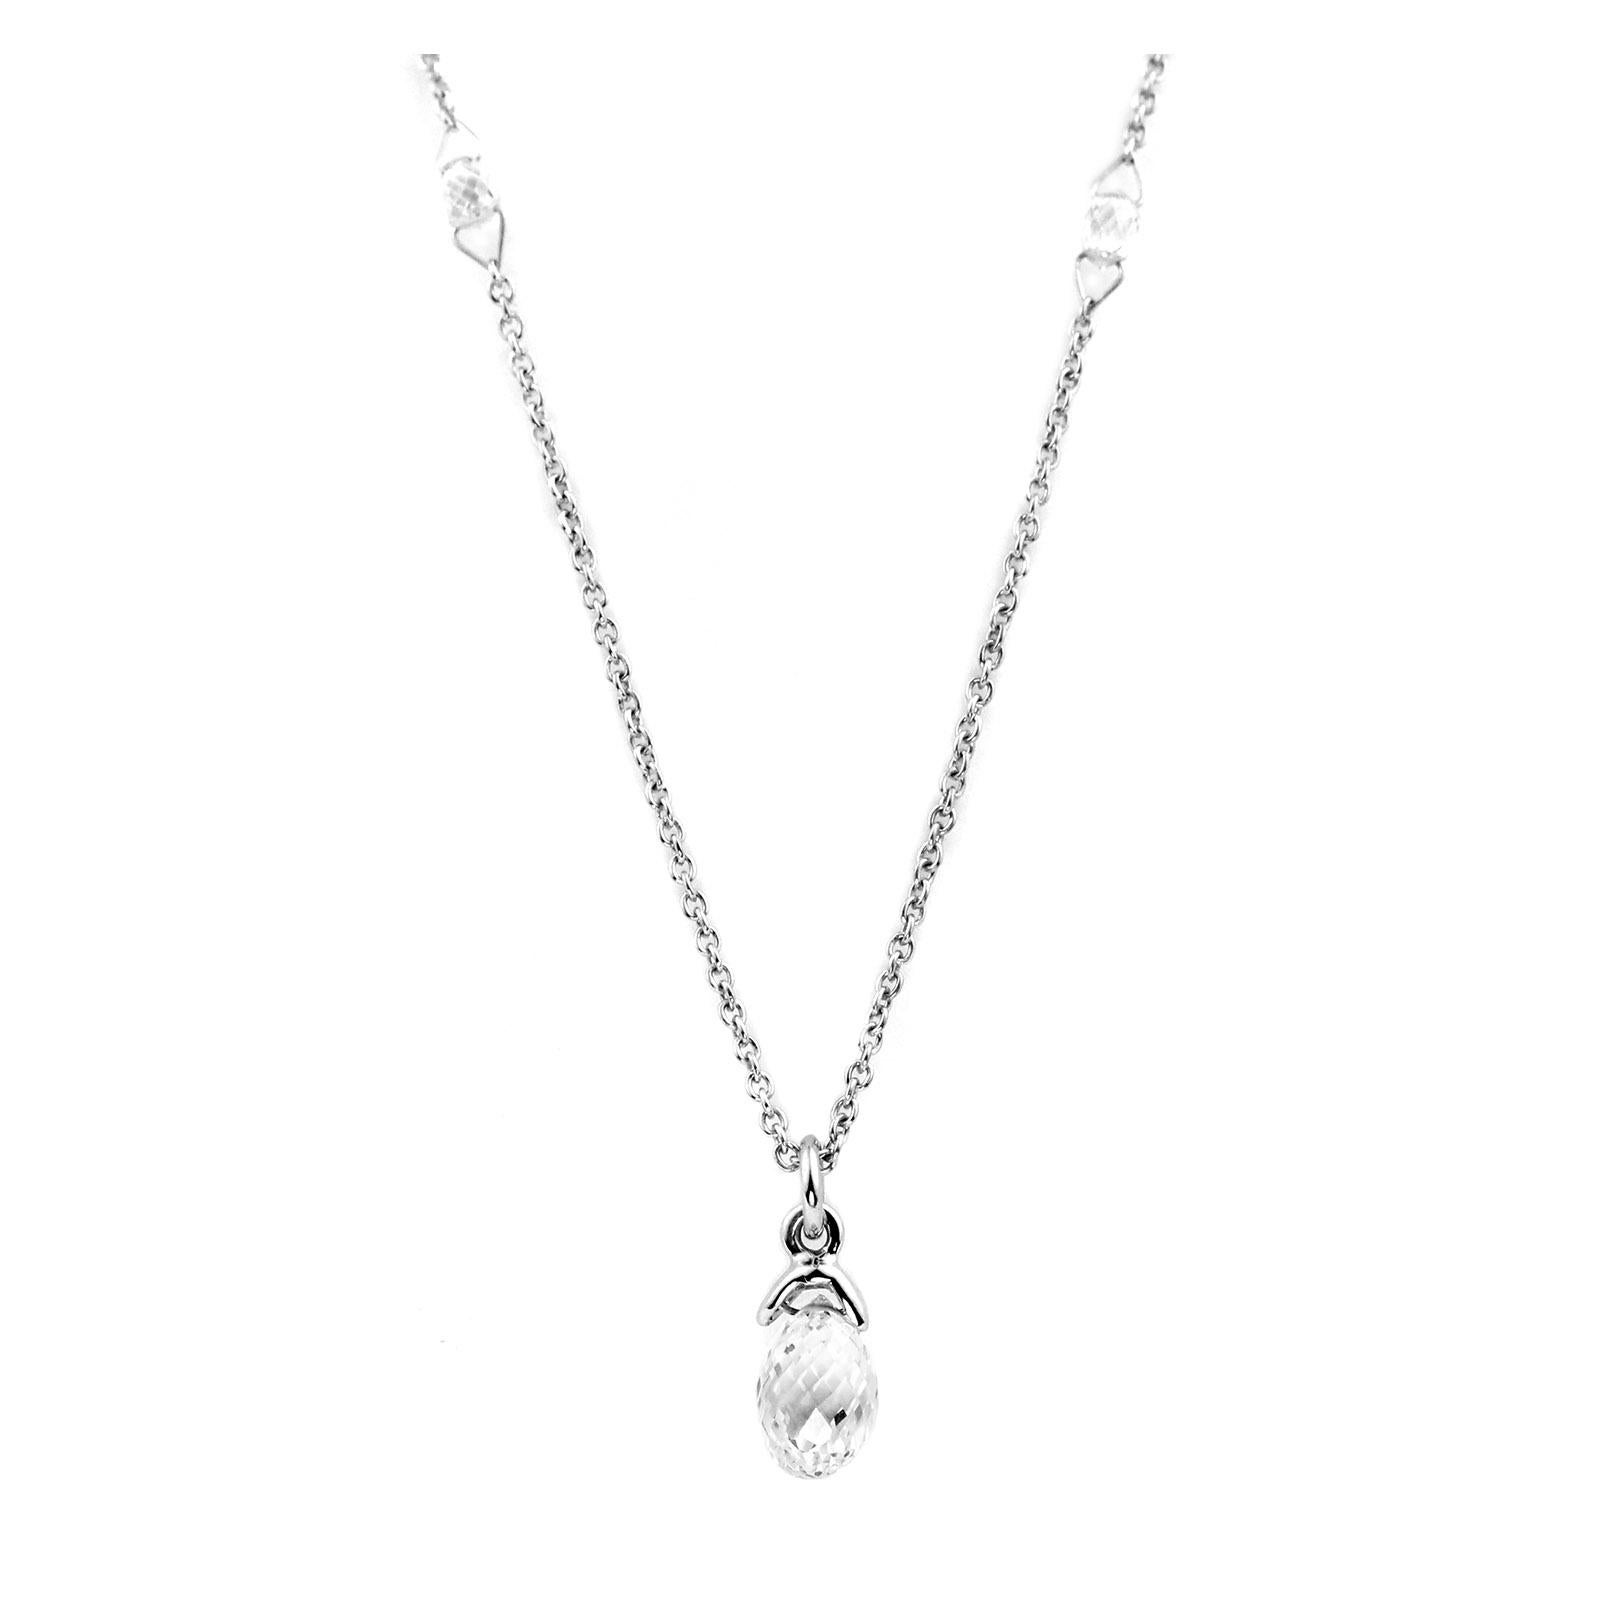 This delicate necklace features a solitary 1.07 Cts. Diamond briolette drop in a simple Platinum setting fixed on an 18 Kt White Gold chain.  The chain contains 9 hand-jeweled, briolette Diamond beads (.90 Cts.) for a little extra sparkle.

Necklace